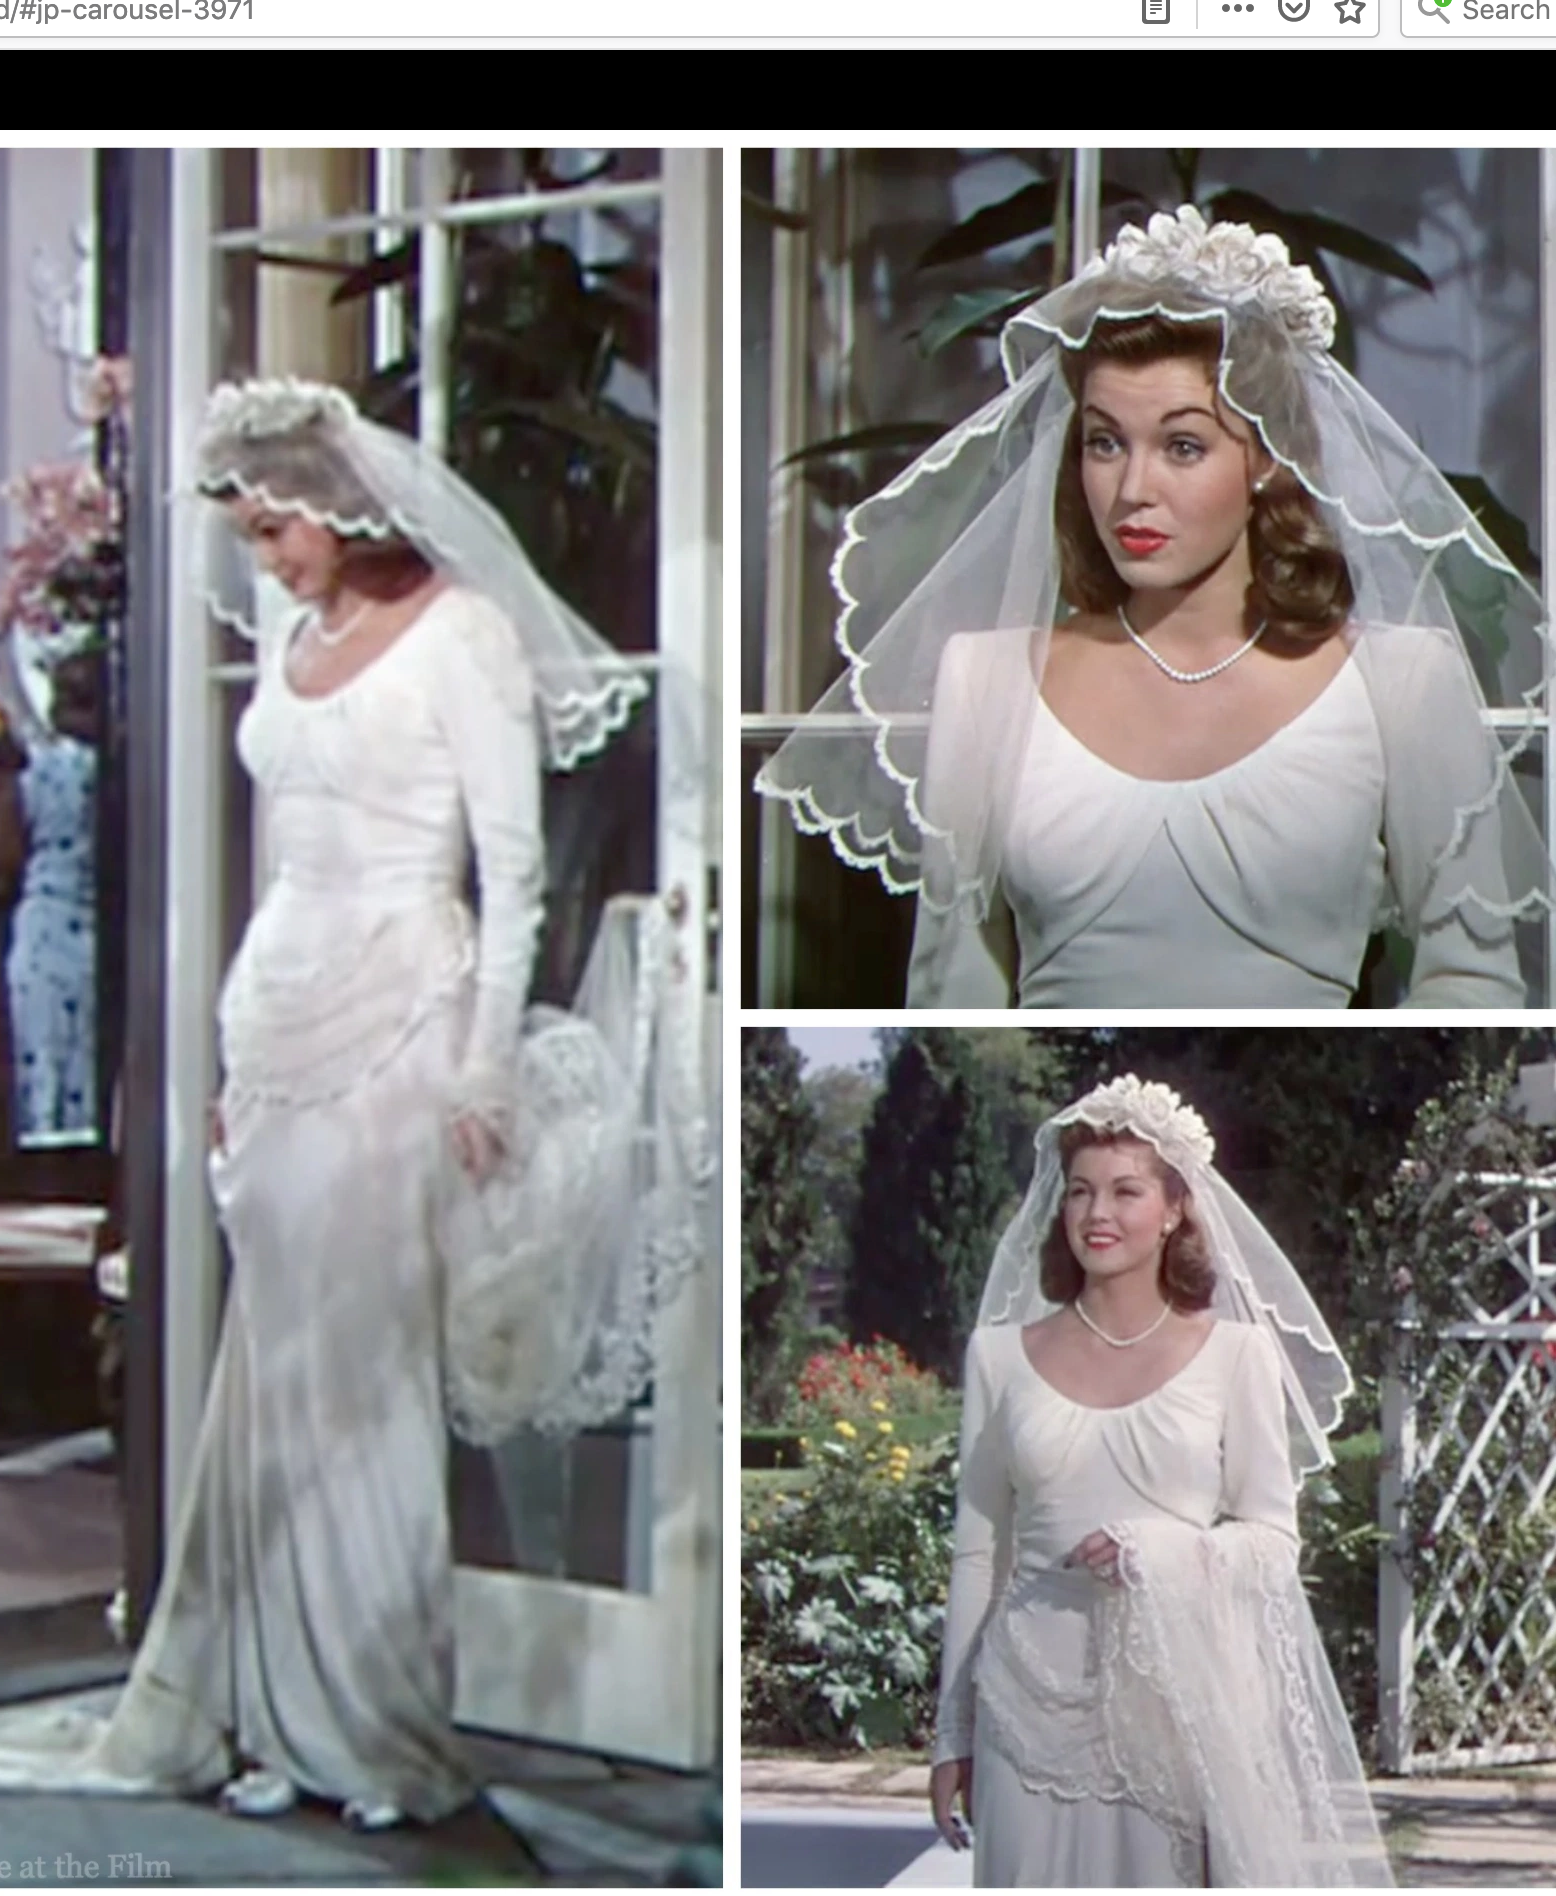 ESther wIlliams wedding.png